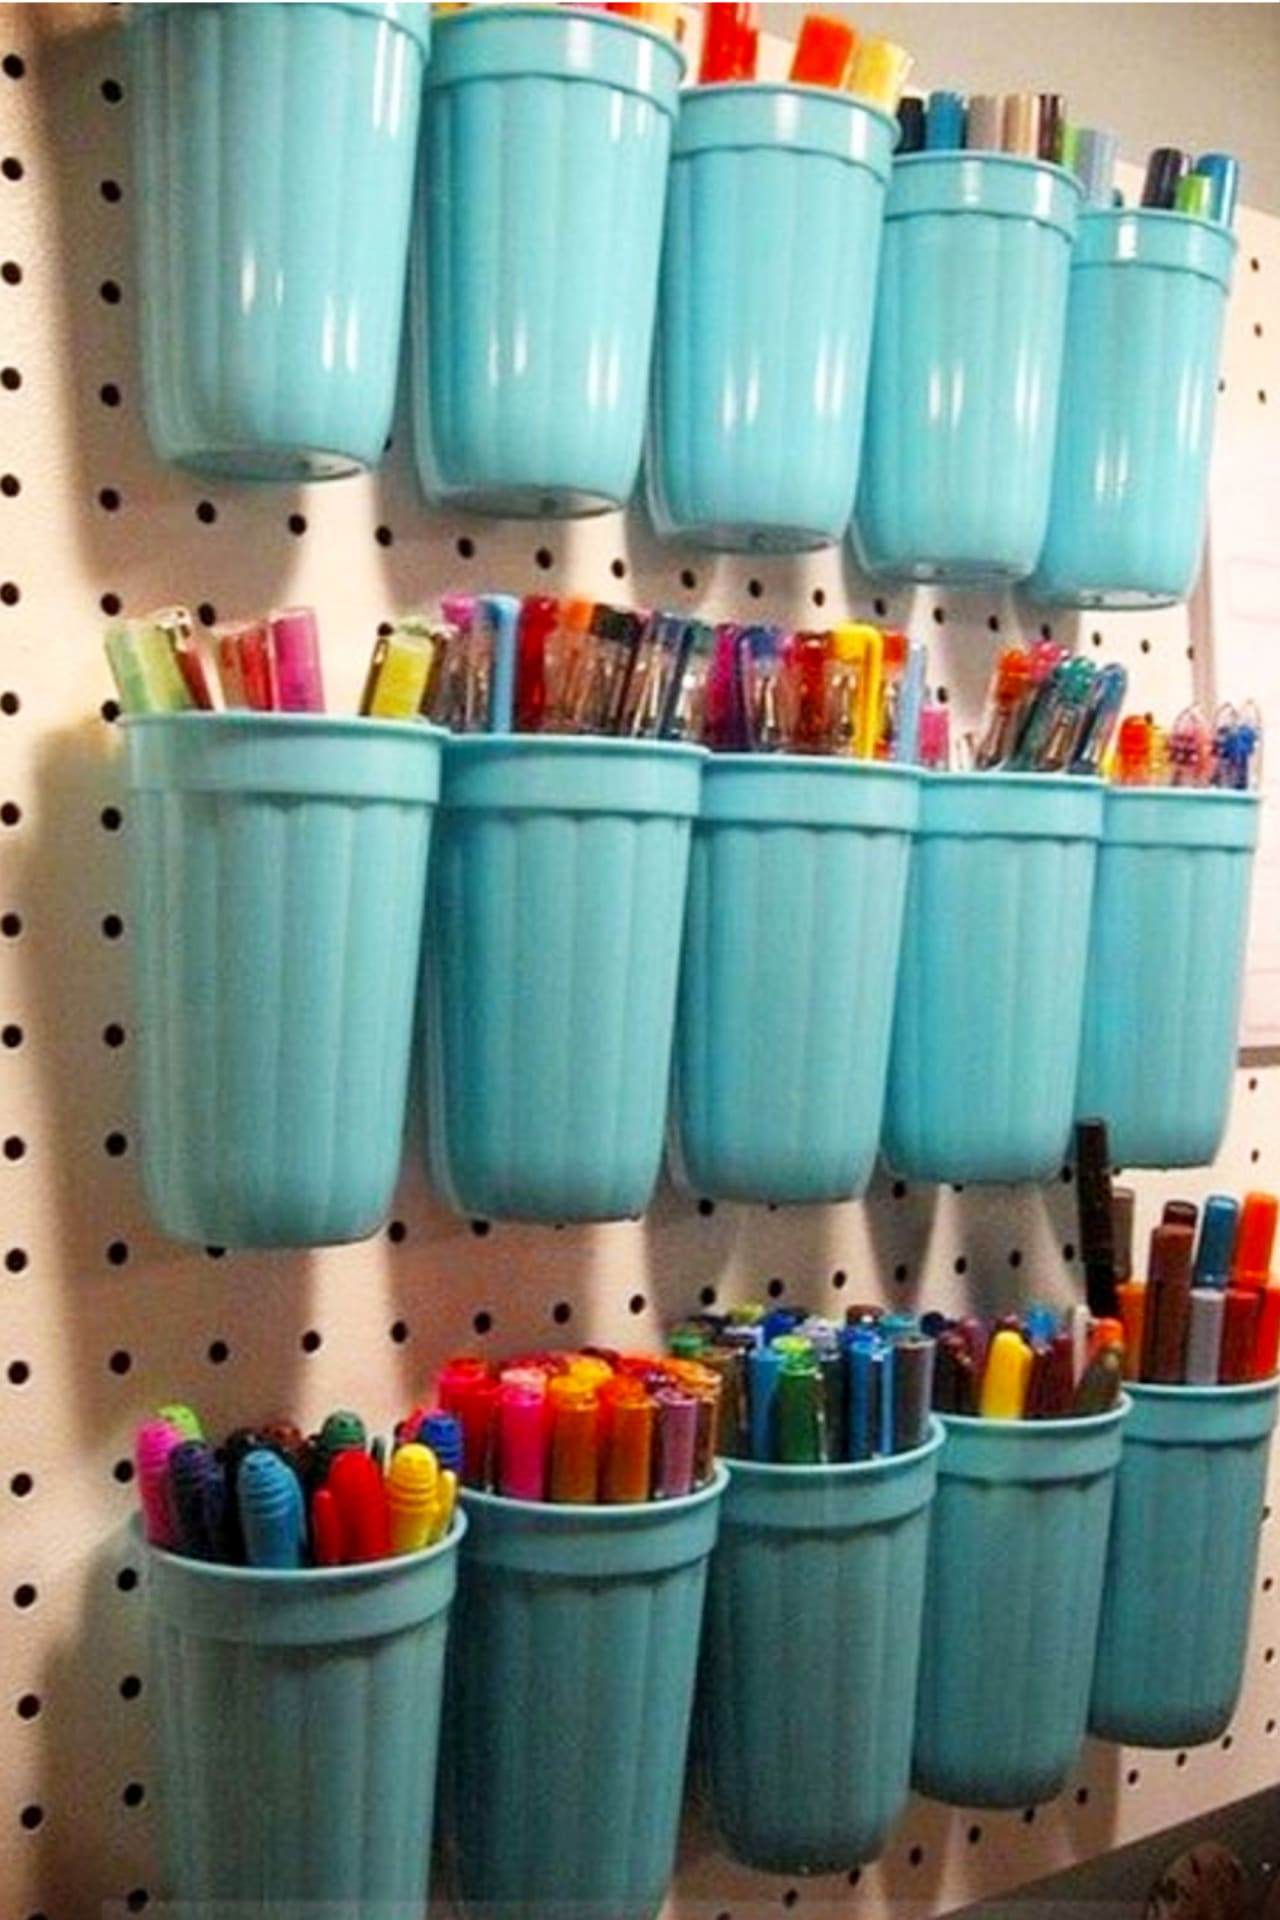 Dollar Stores Organizing - Craft room ideas on a budget with Dollar Store and Dollar Tree items and organizers - creative ways to organize your craft room wall